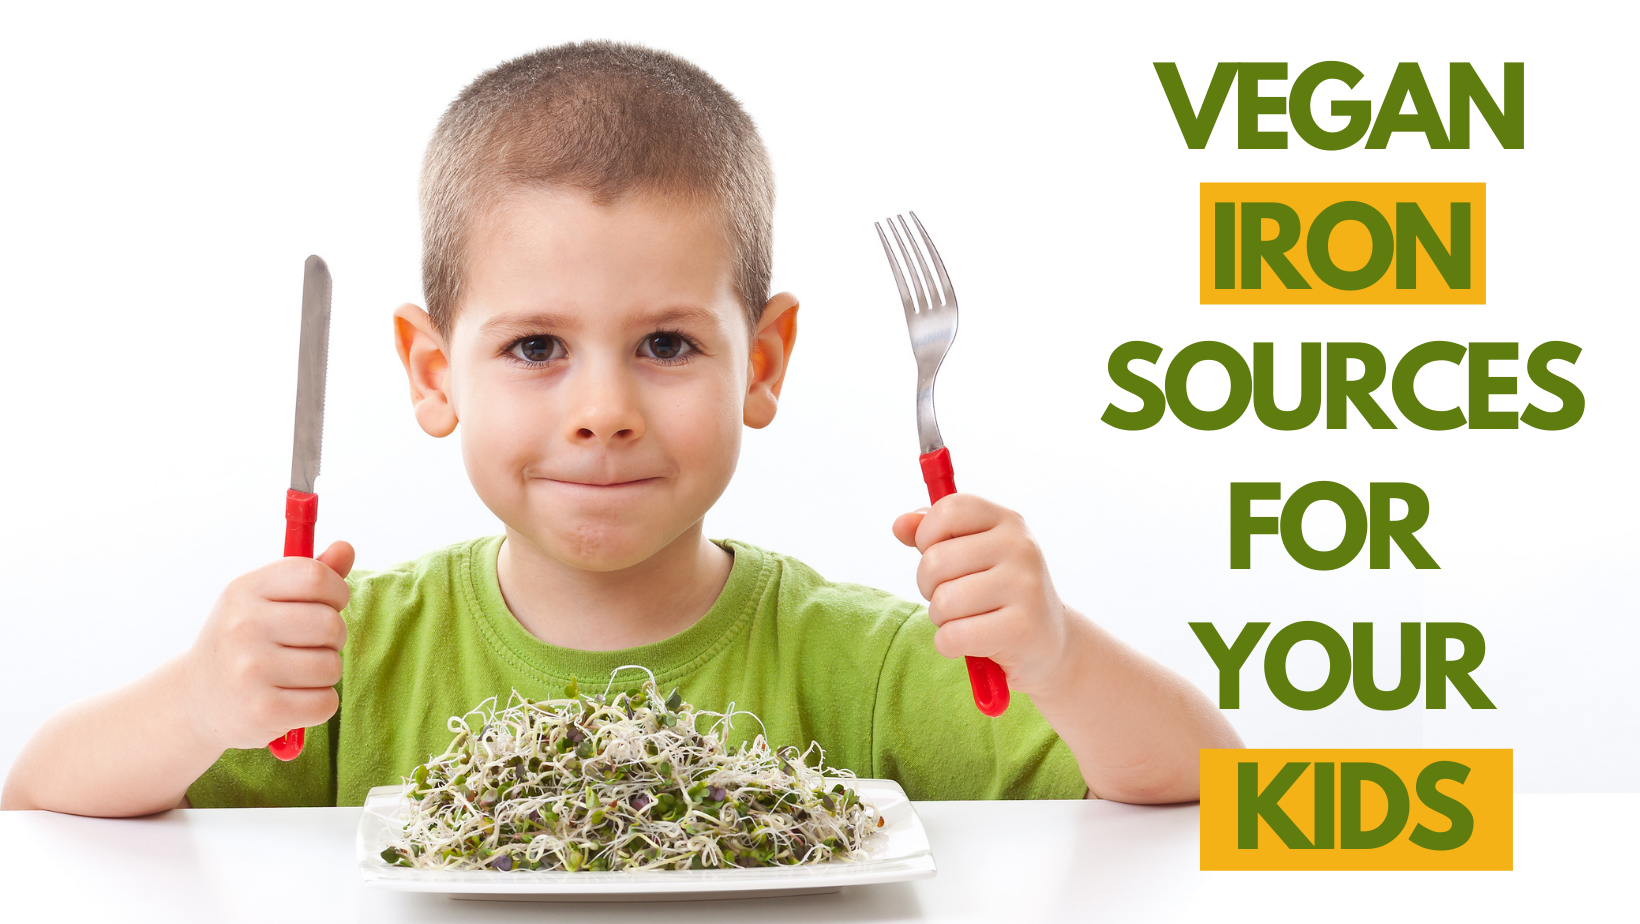 8 Essential Vegan Iron Sources For Your Kids